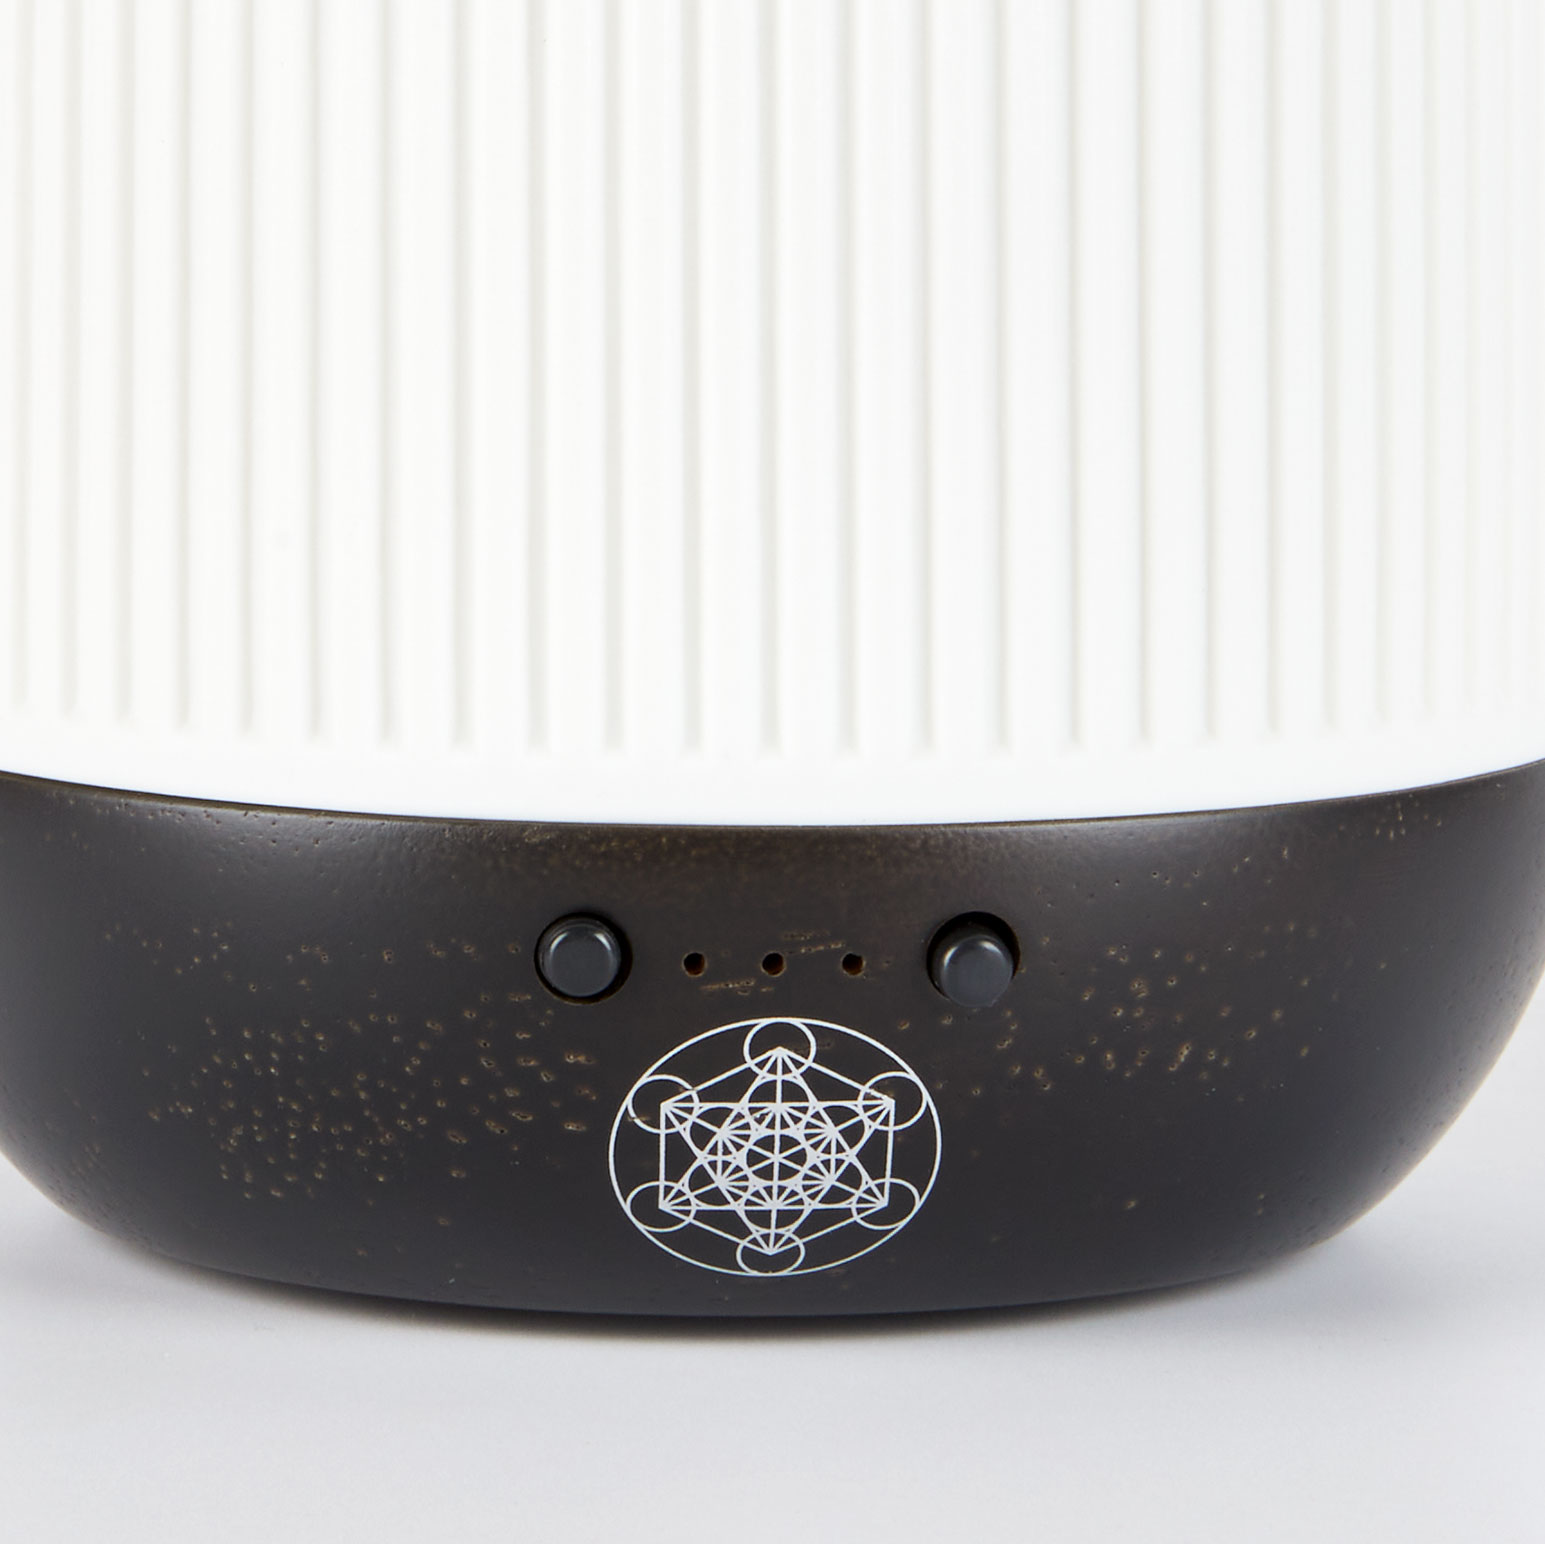 Essential Oil Diffuser sacred geometry detail